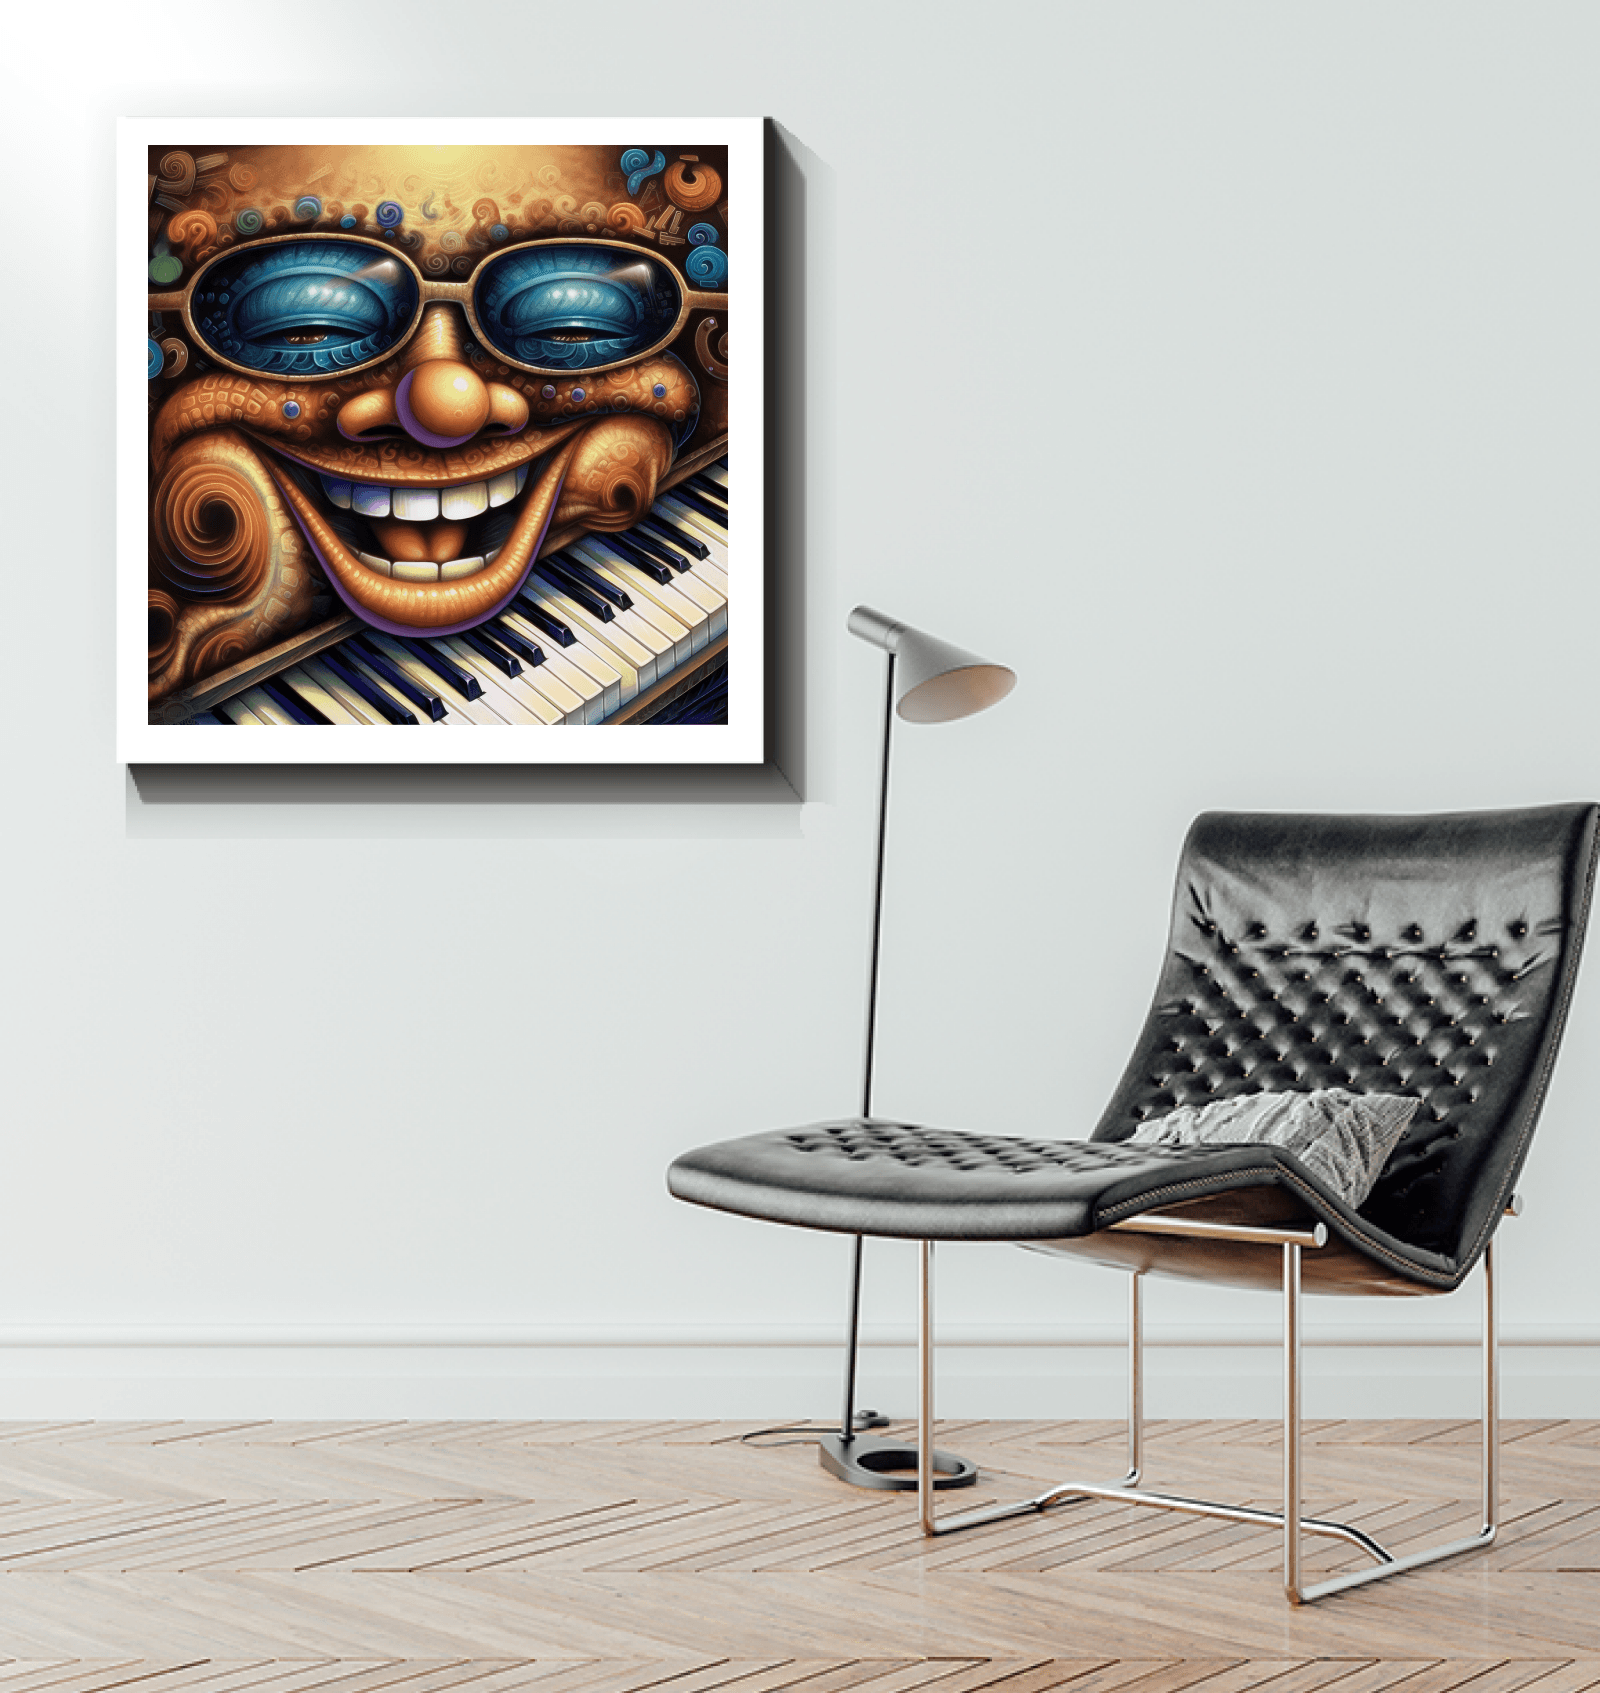 Gallery Wrapped Canvas Print.